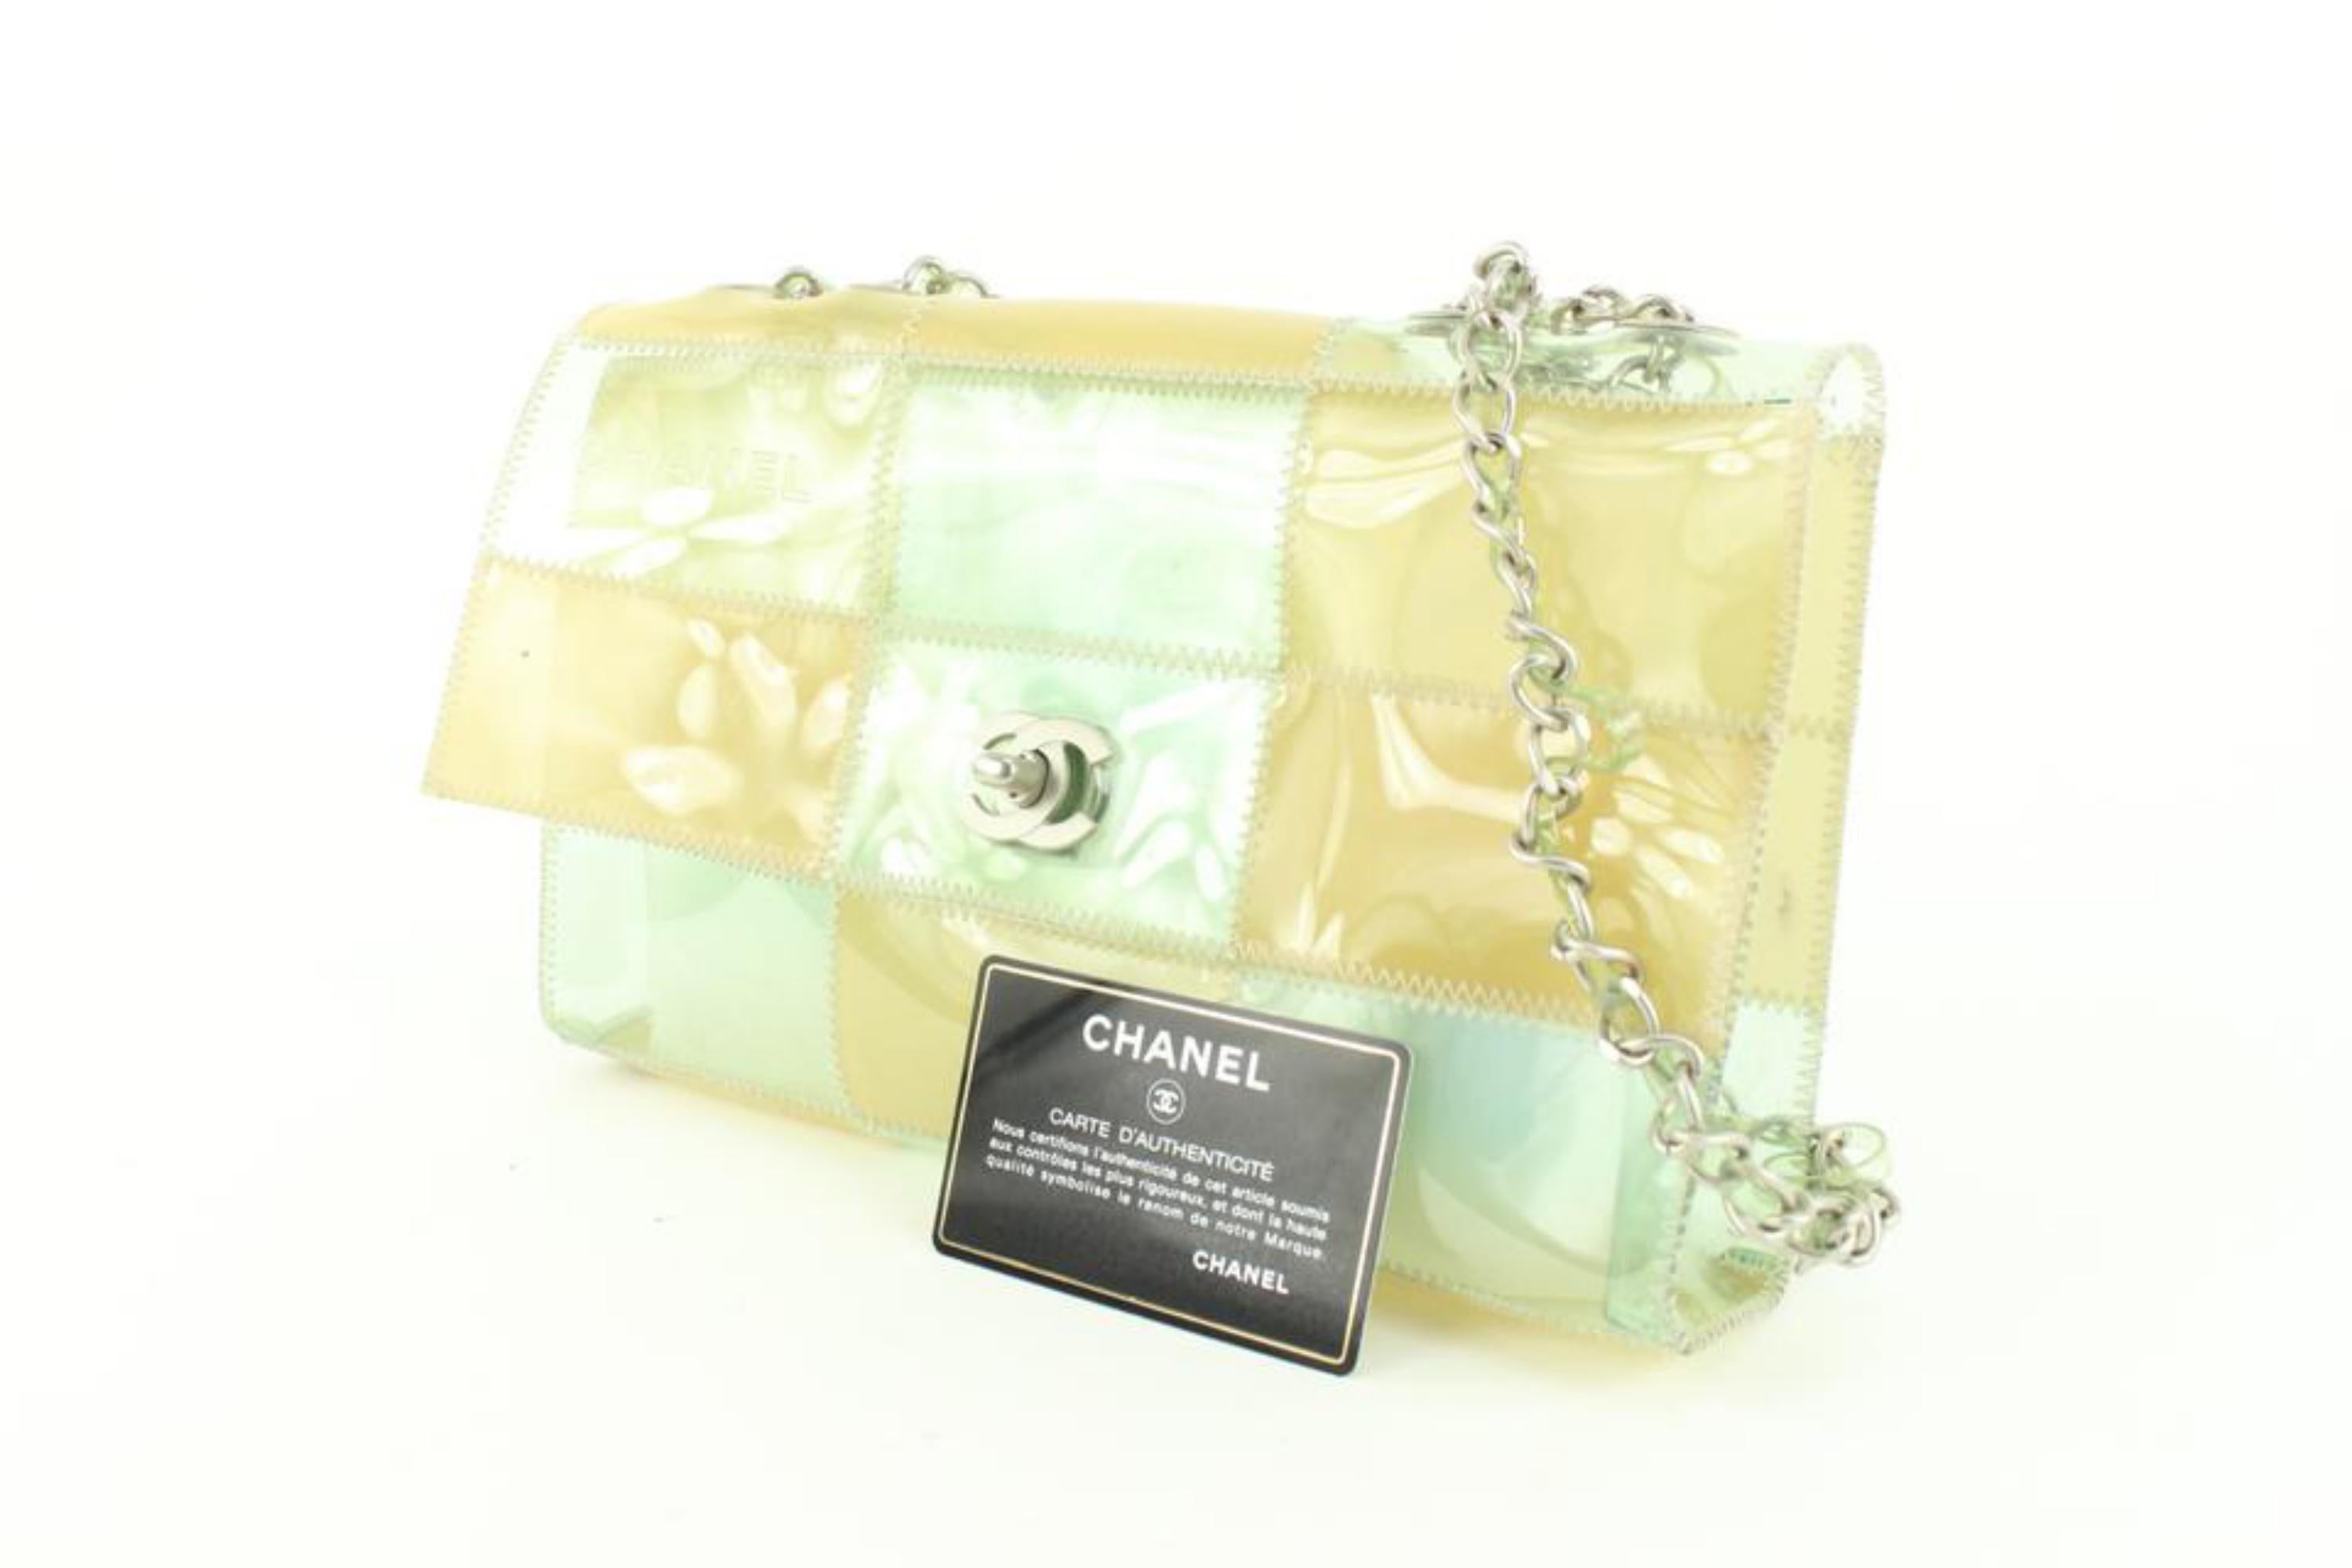 Chanel Clear Vinyl Patchwork Naked Flap Chain Translucent Bag 1025c27 For Sale 4